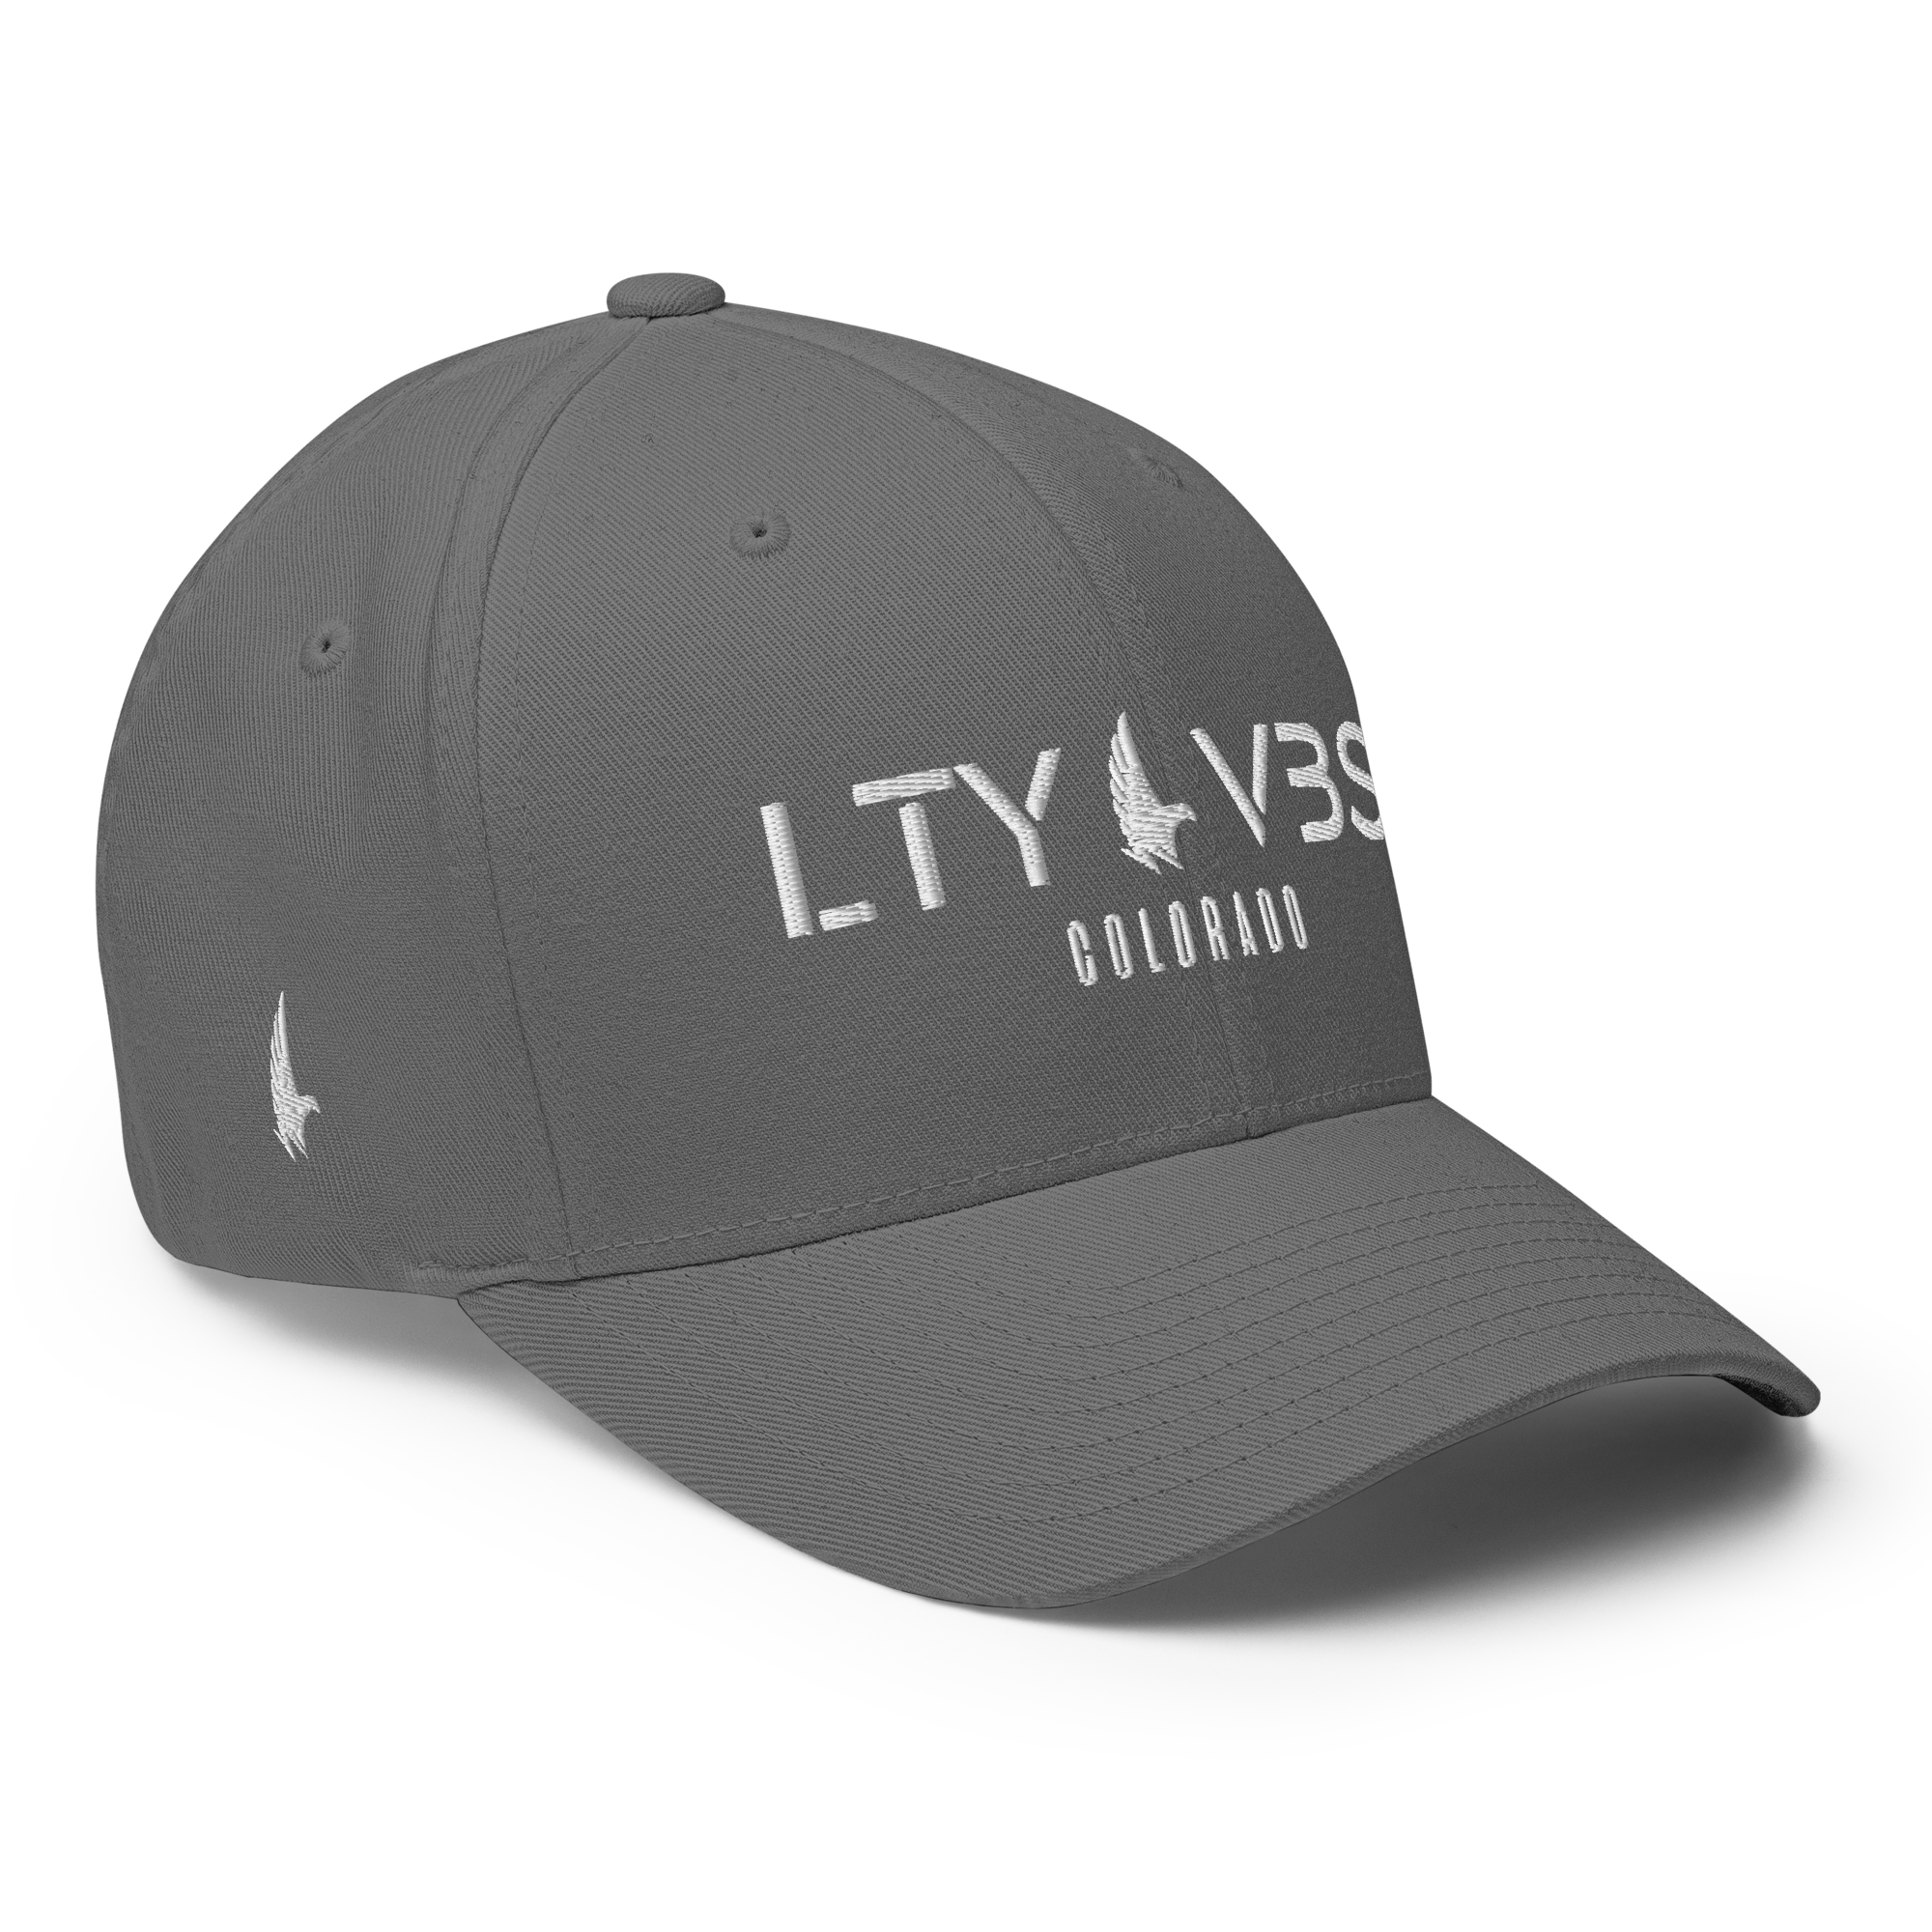 Loyalty Era Colorado Fitted Hat - Gray / White Fitted - Loyalty Vibes